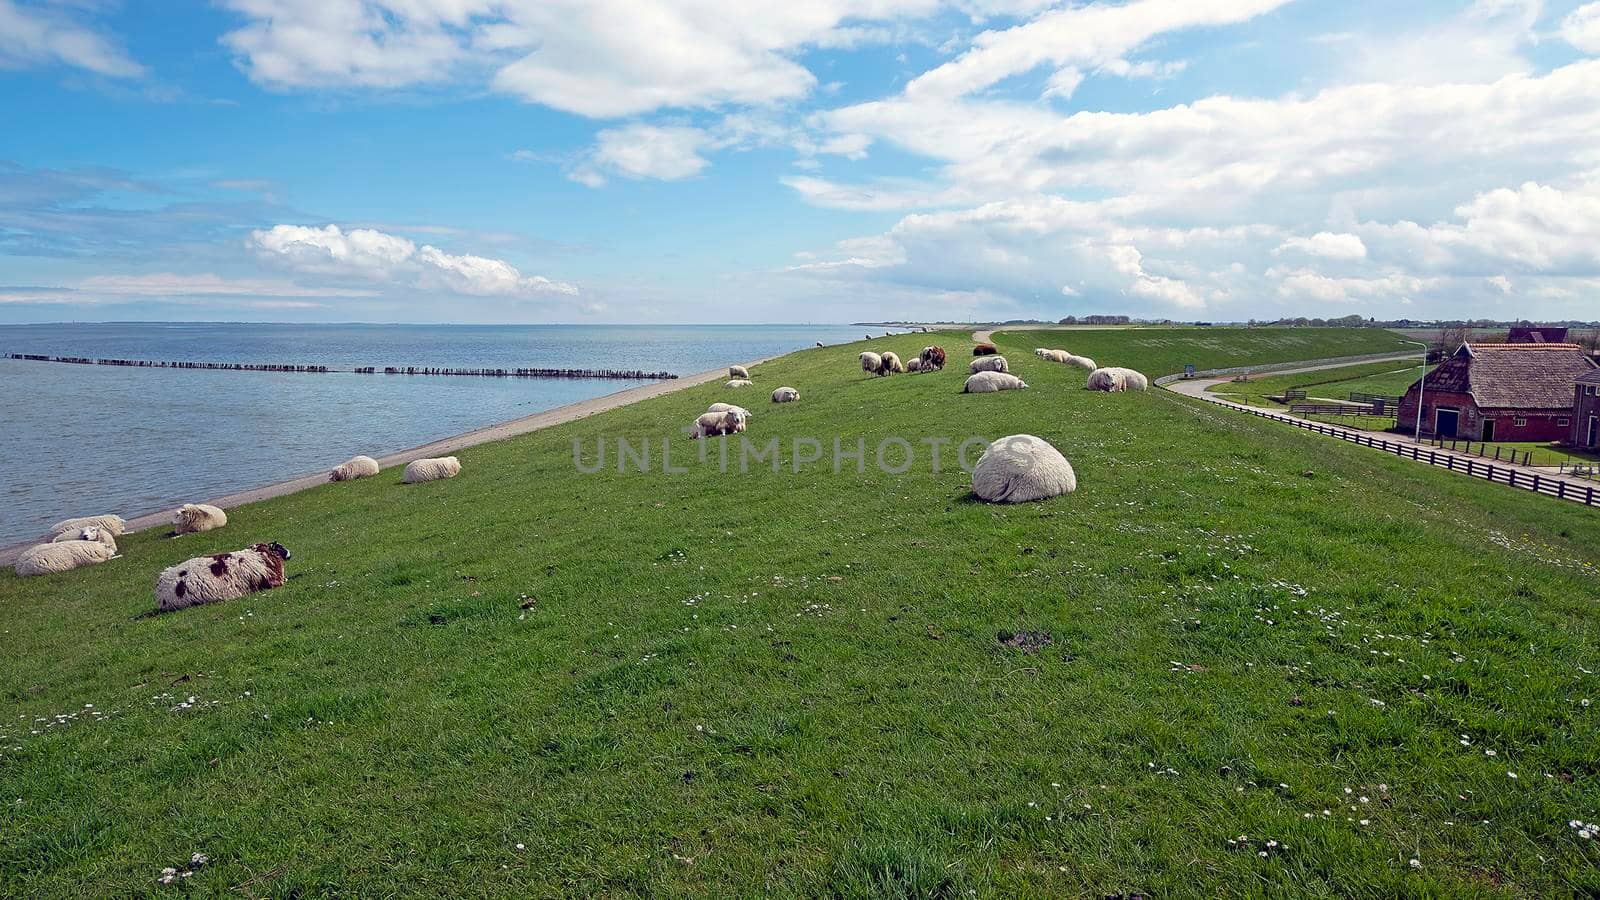 Sheep on the dyke near the Wadden Sea in the Netherlands by devy